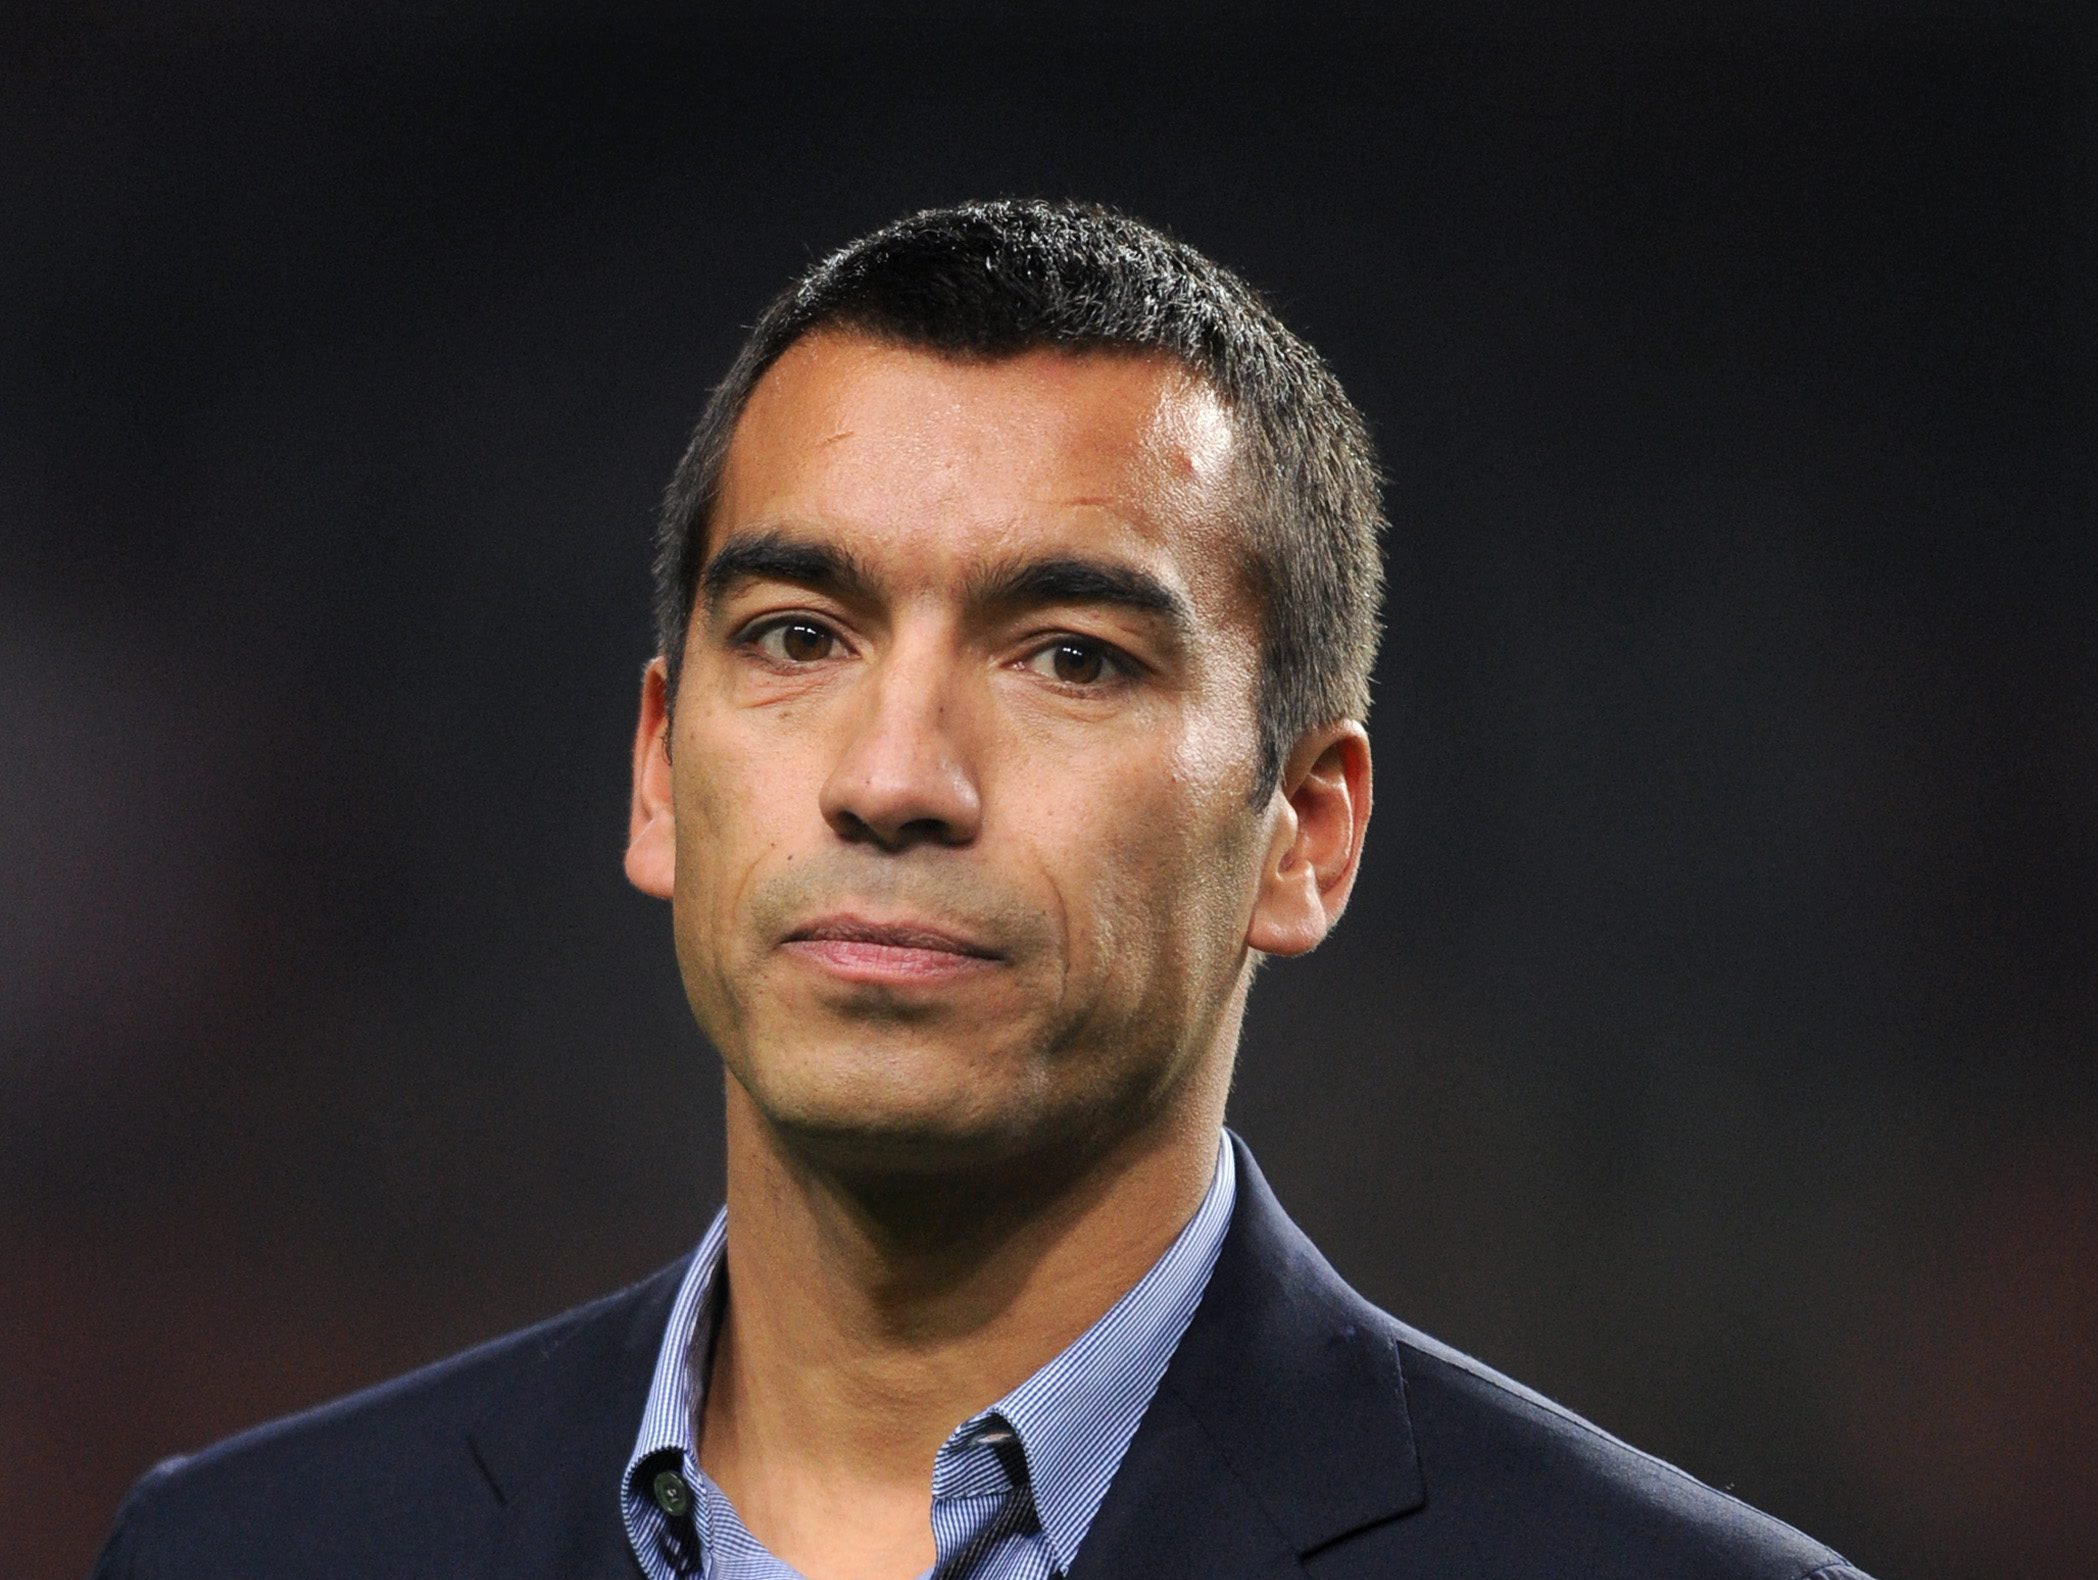 Giovanni Van Bronckhorst emerges as a leading candidate in Rangers hunt to replace Steven Gerrard as boss